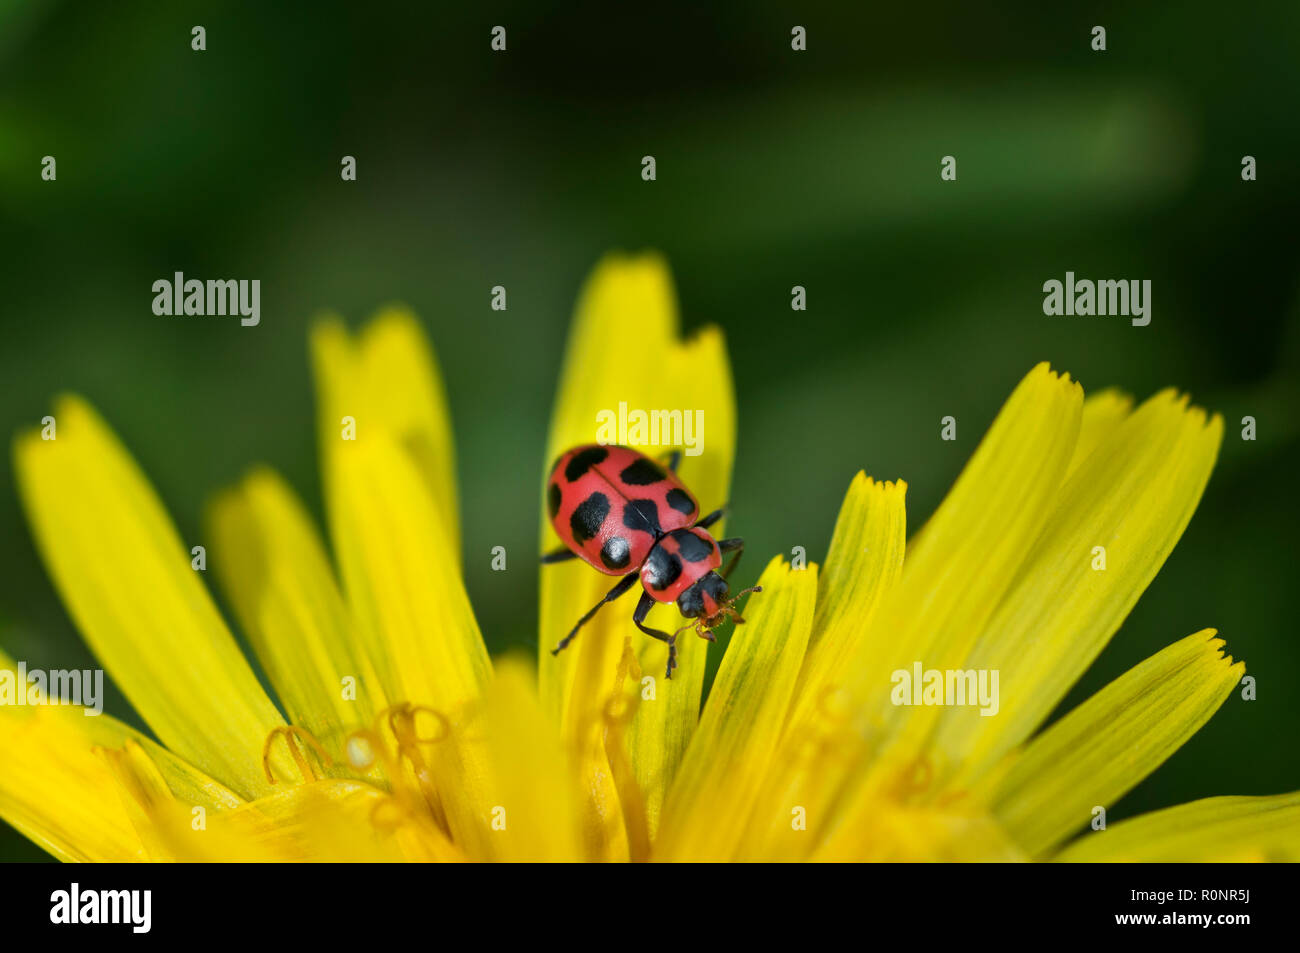 Closeup of a ladybug on a yellow flower Stock Photo